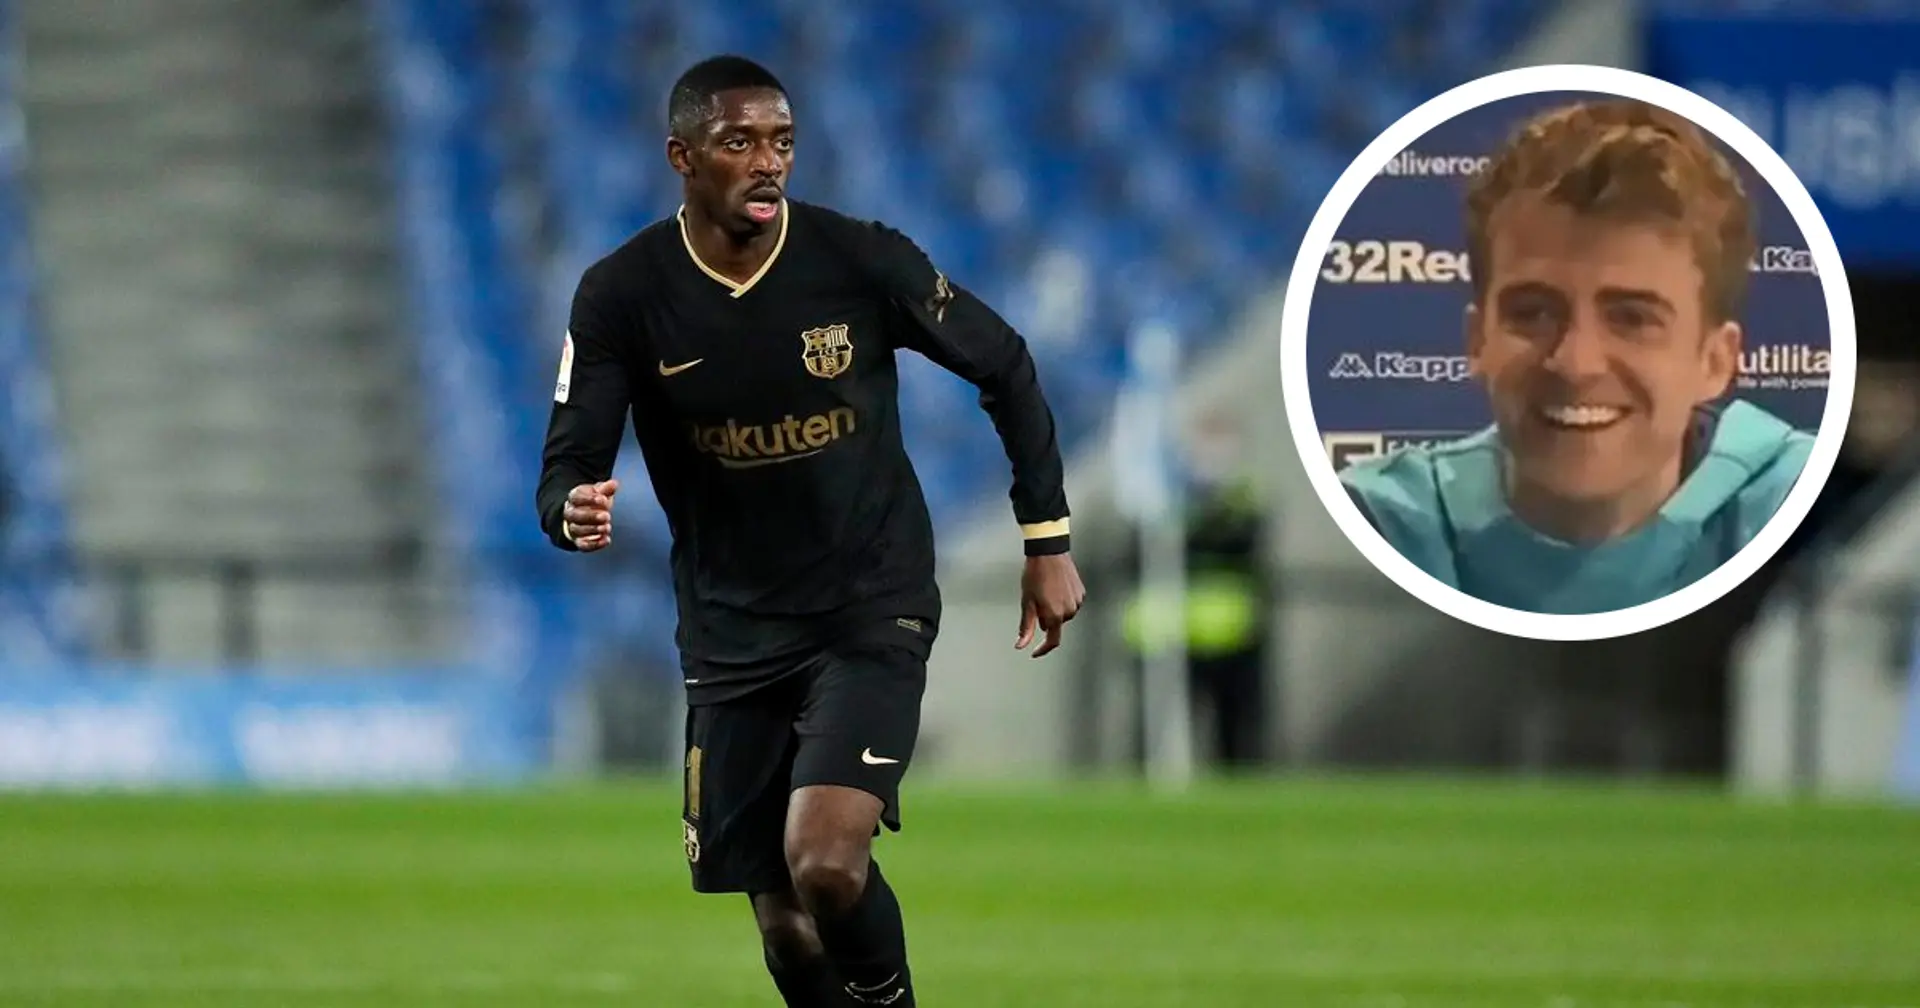 'You serious?': Ousmane Dembele supports a Premier League club, you'd never guess which